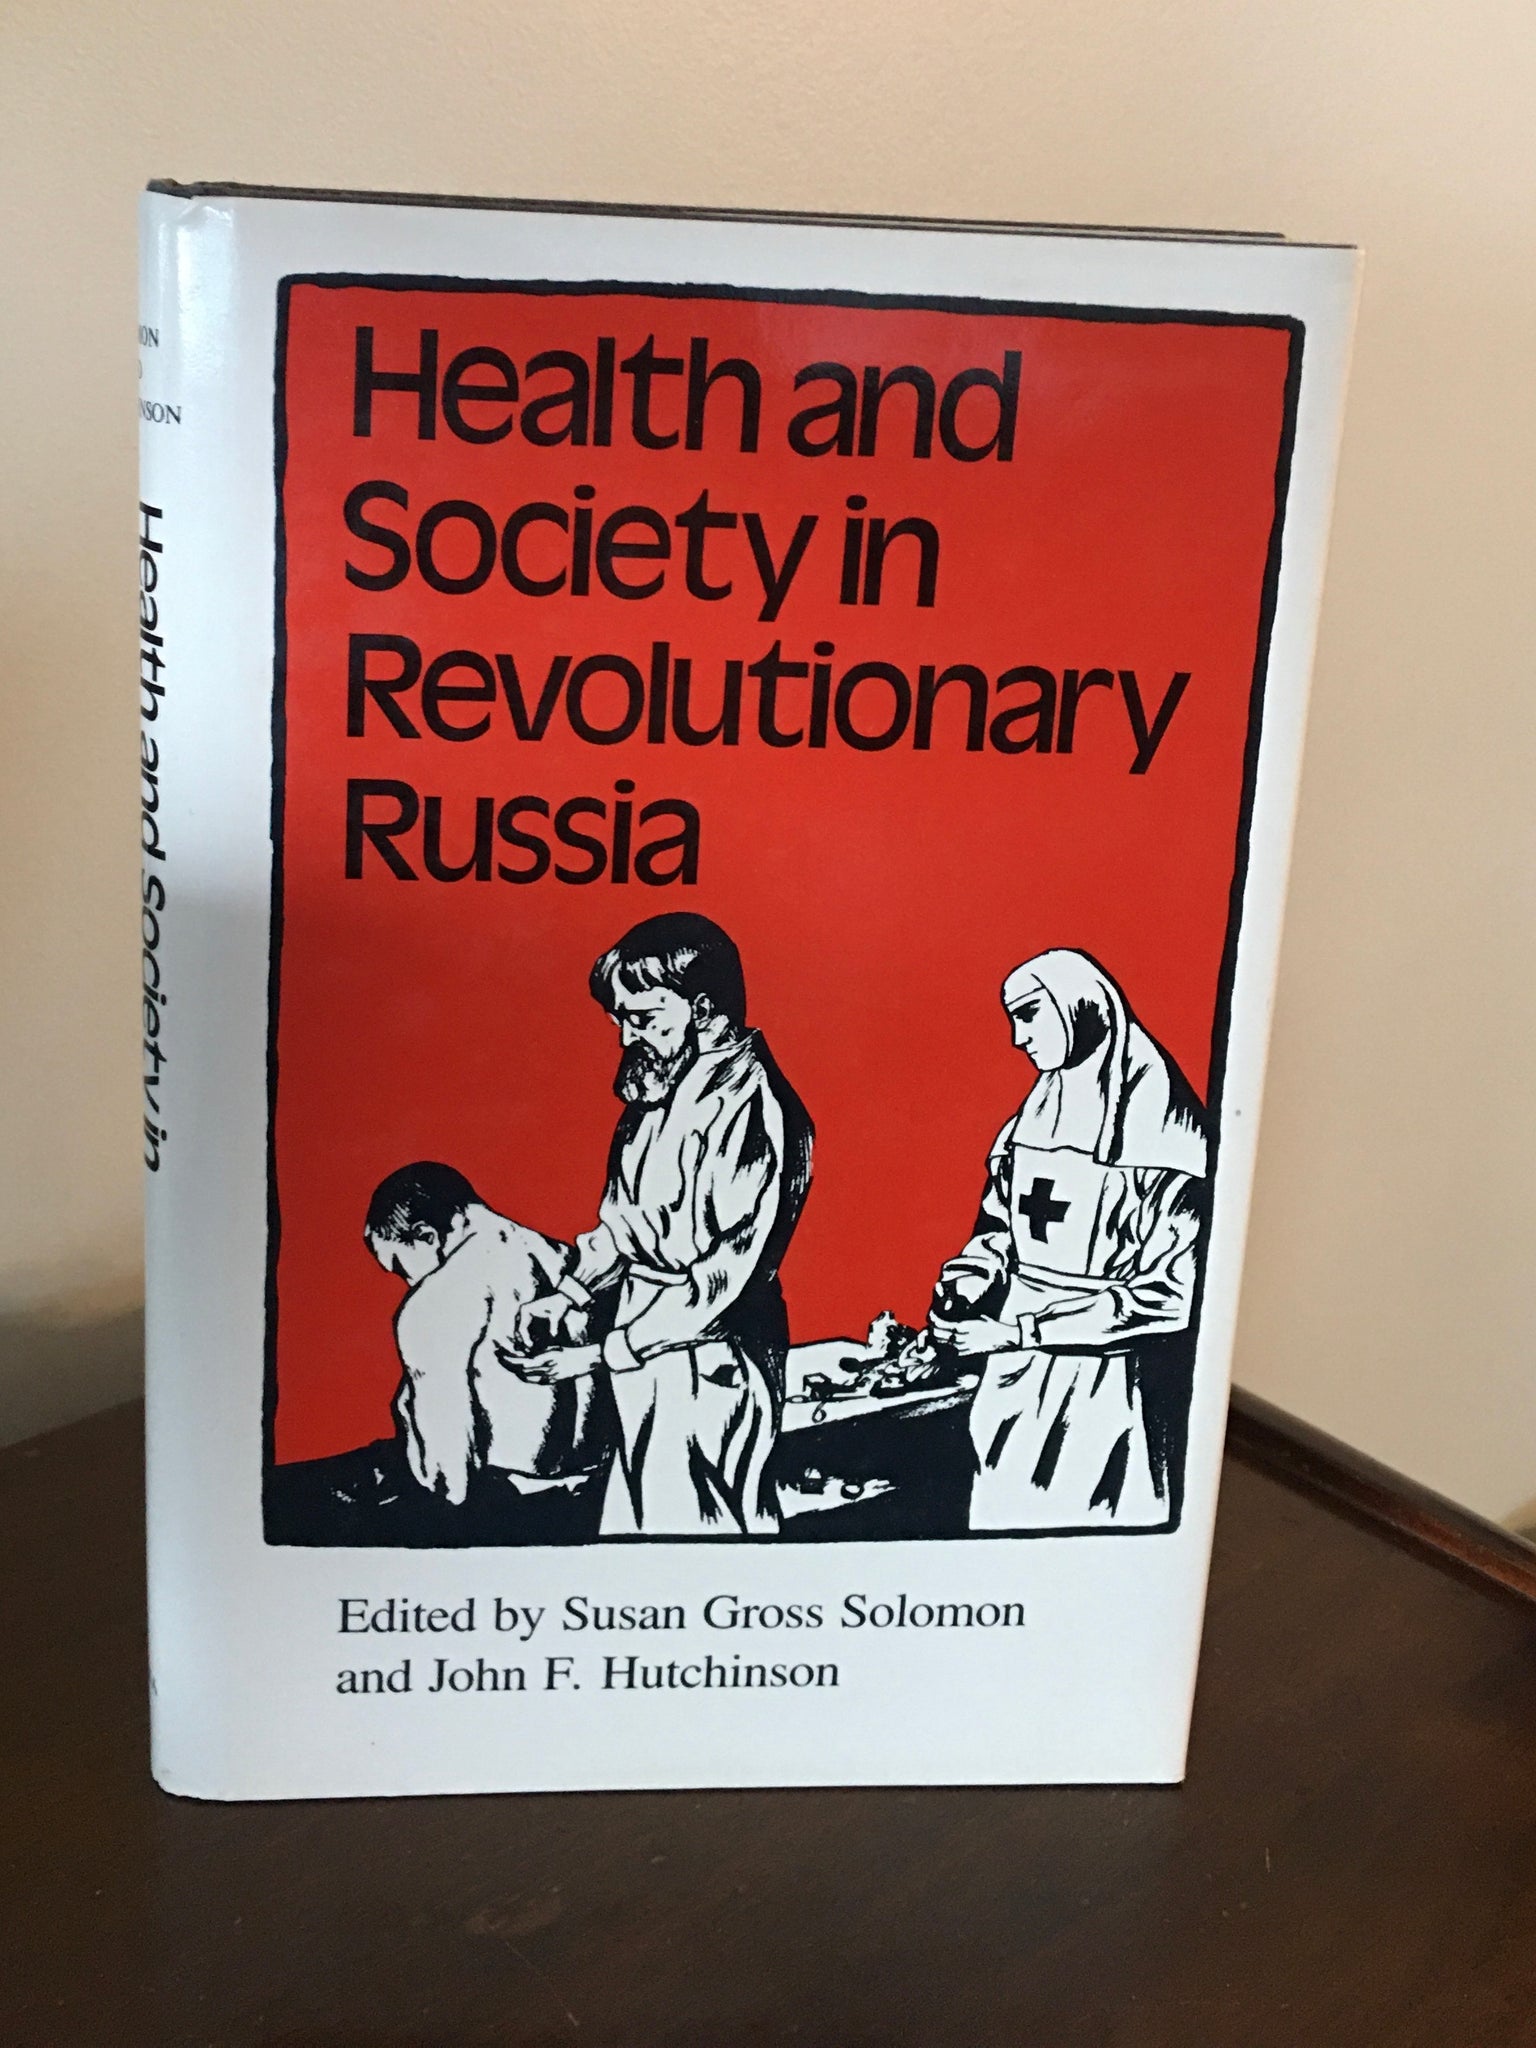 Health and Society in Revolutionary Russia